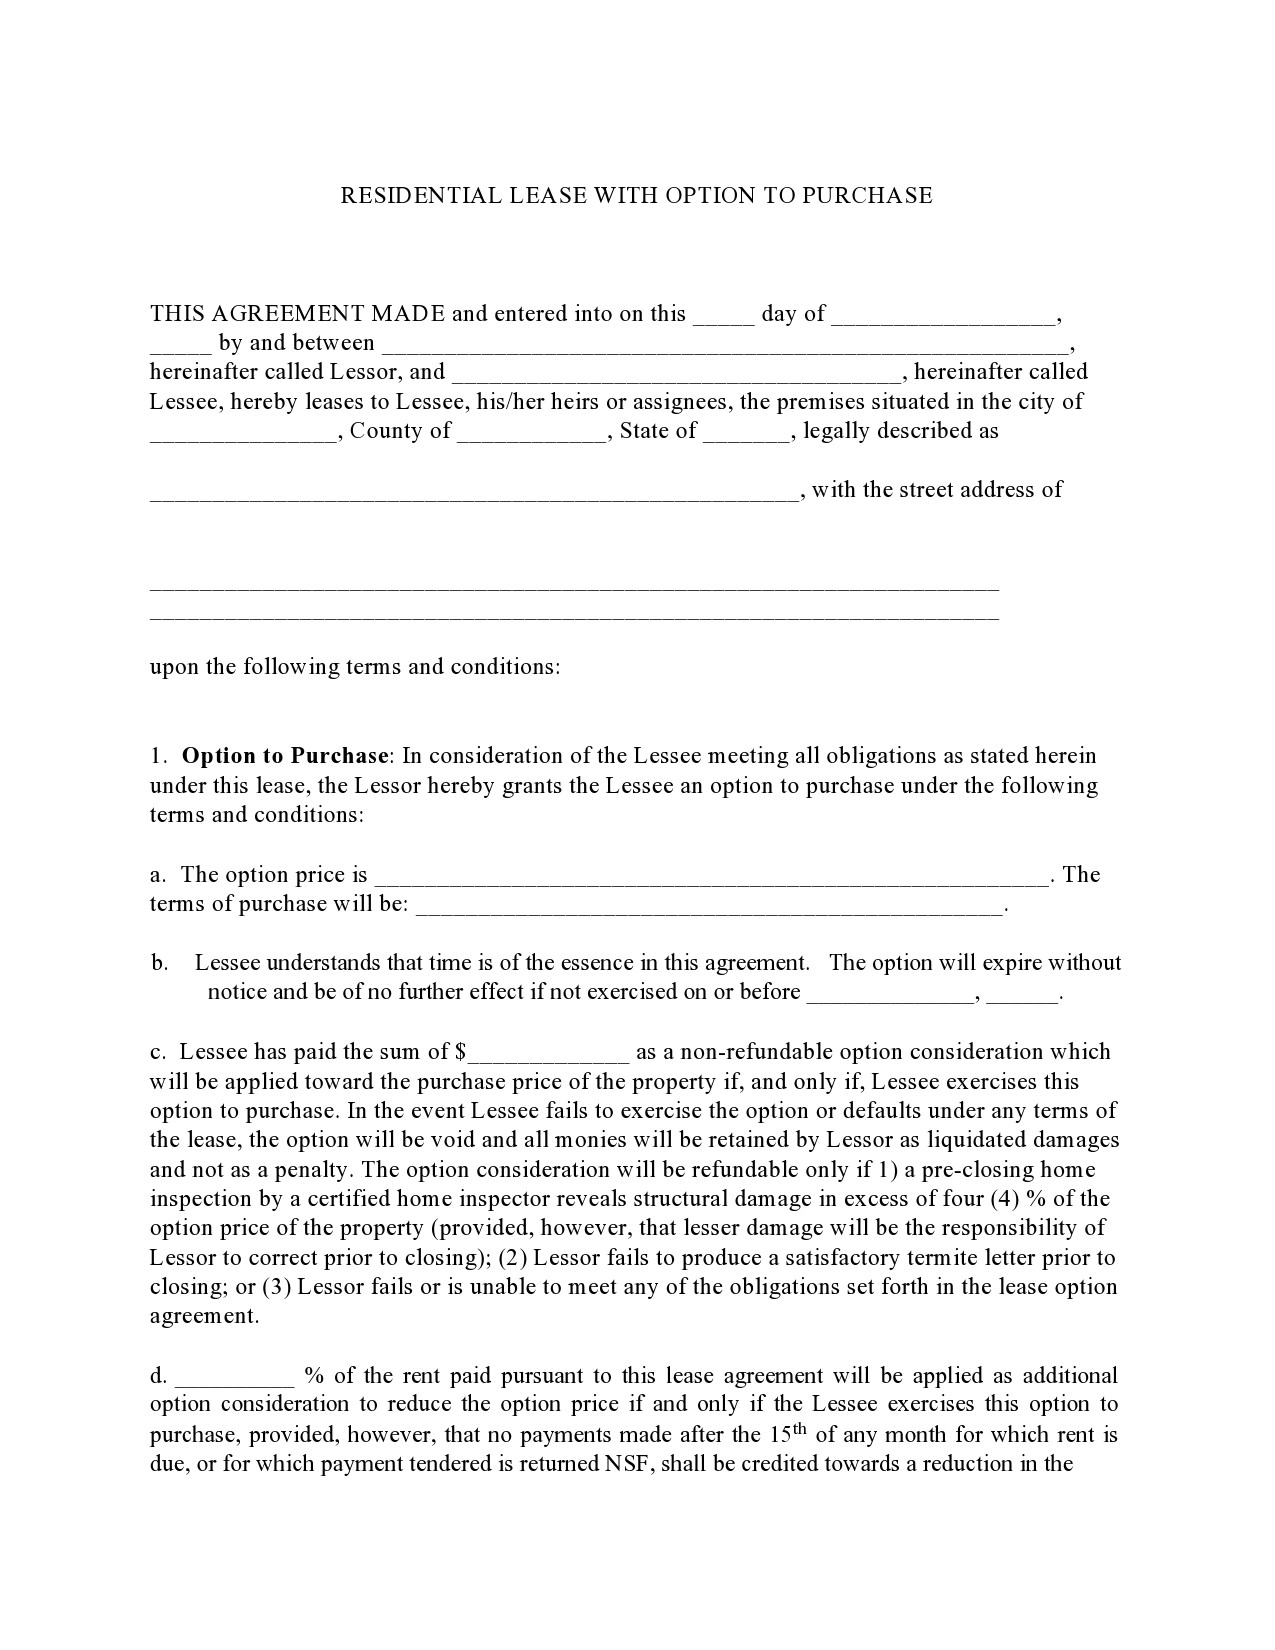 Free residential lease agreement 17